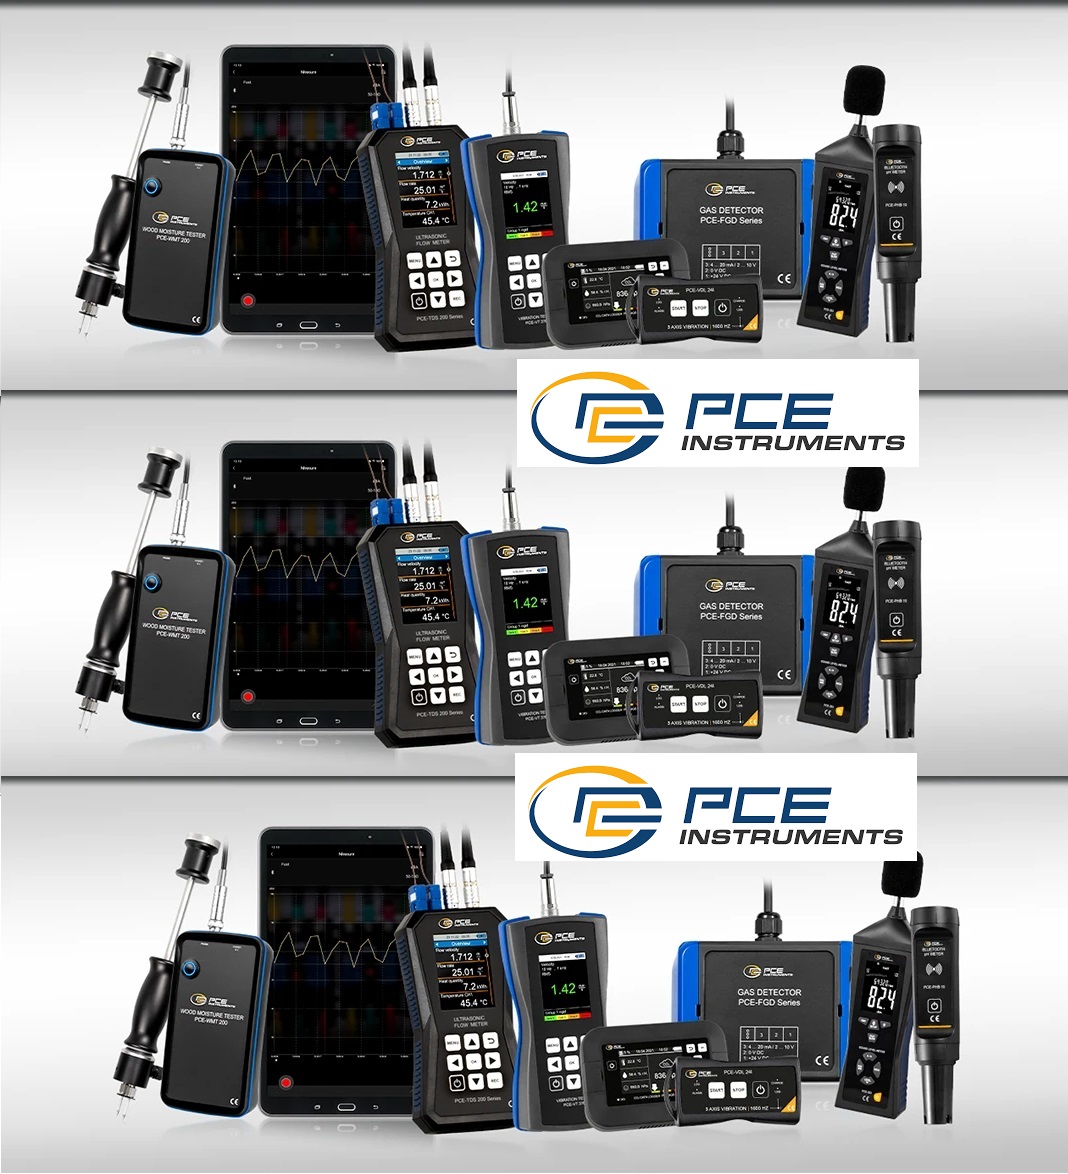 PCE instruments Tools and Equipment for Measuring, Weighing and Control Systems